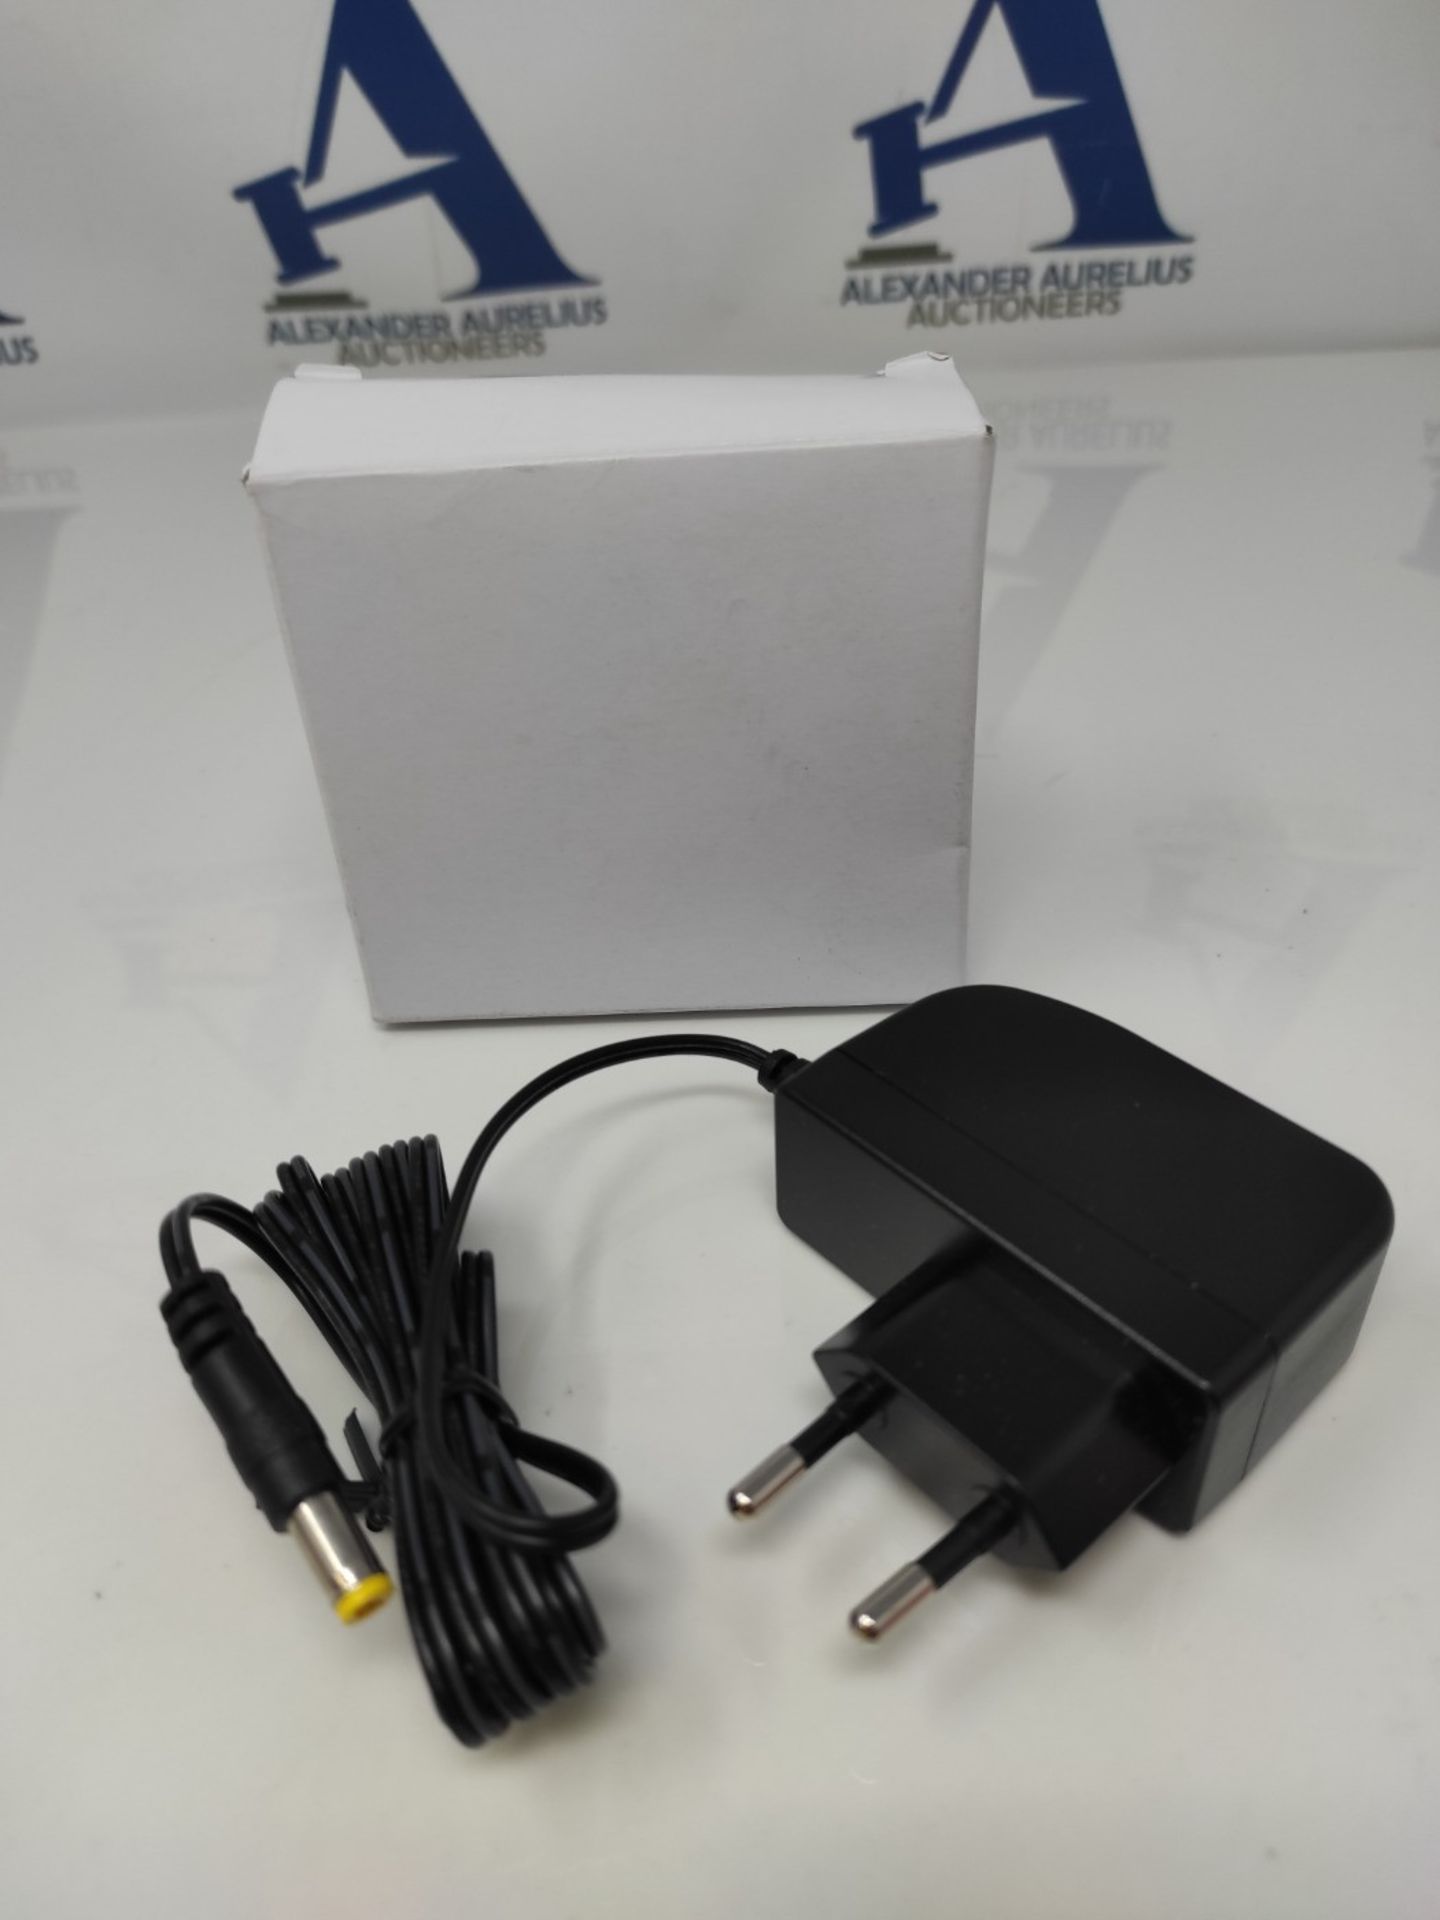 PremiumCord Universal Power Supply 240V/12V/1.5A DC, AC/DC Adapter, Power Adapter and